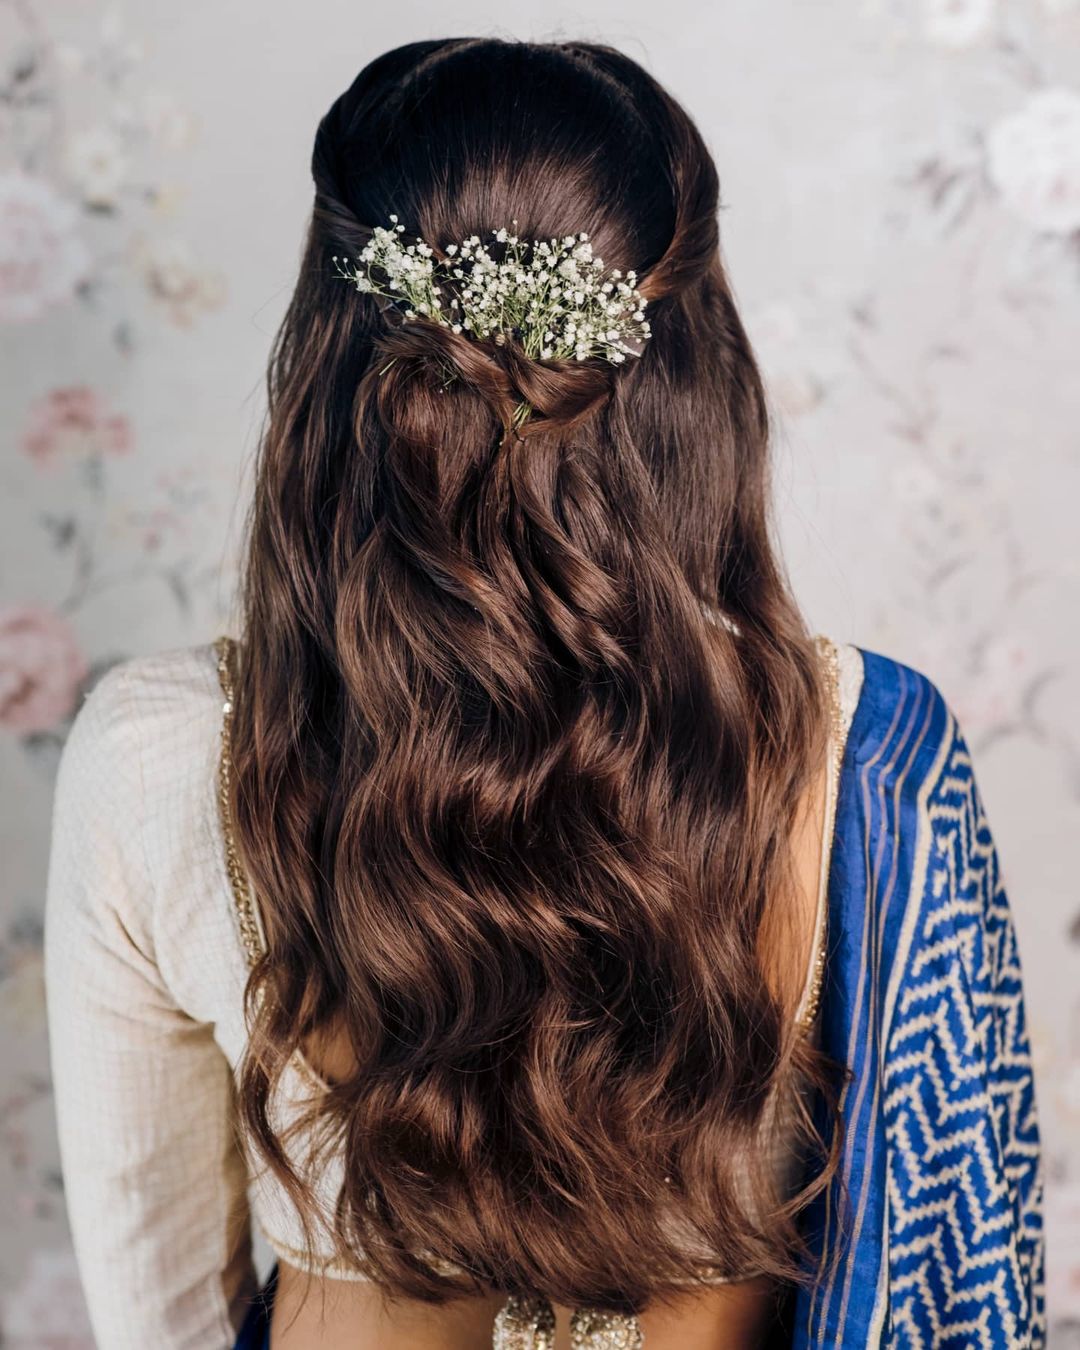 Pelli Poola Jada- Since 2012 | 2020 : South Indian brides loved  experimenting hairstyles and wanted different florals for engagement,  reception or wedding. Light weight... | Instagram